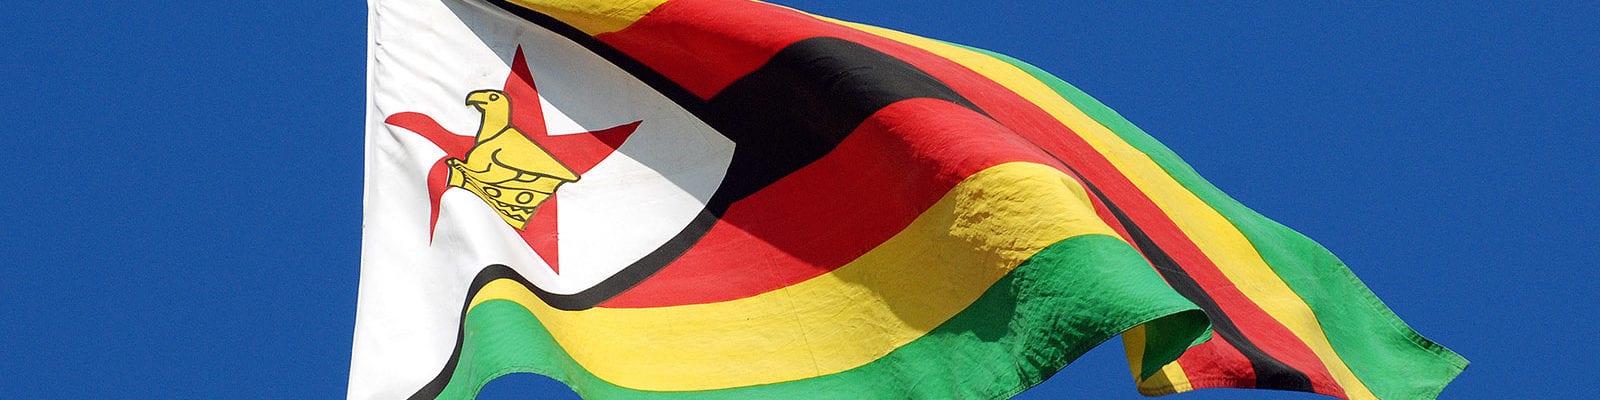 Official flag of Zimbabwe, featuring a soapstone bird and a red star.